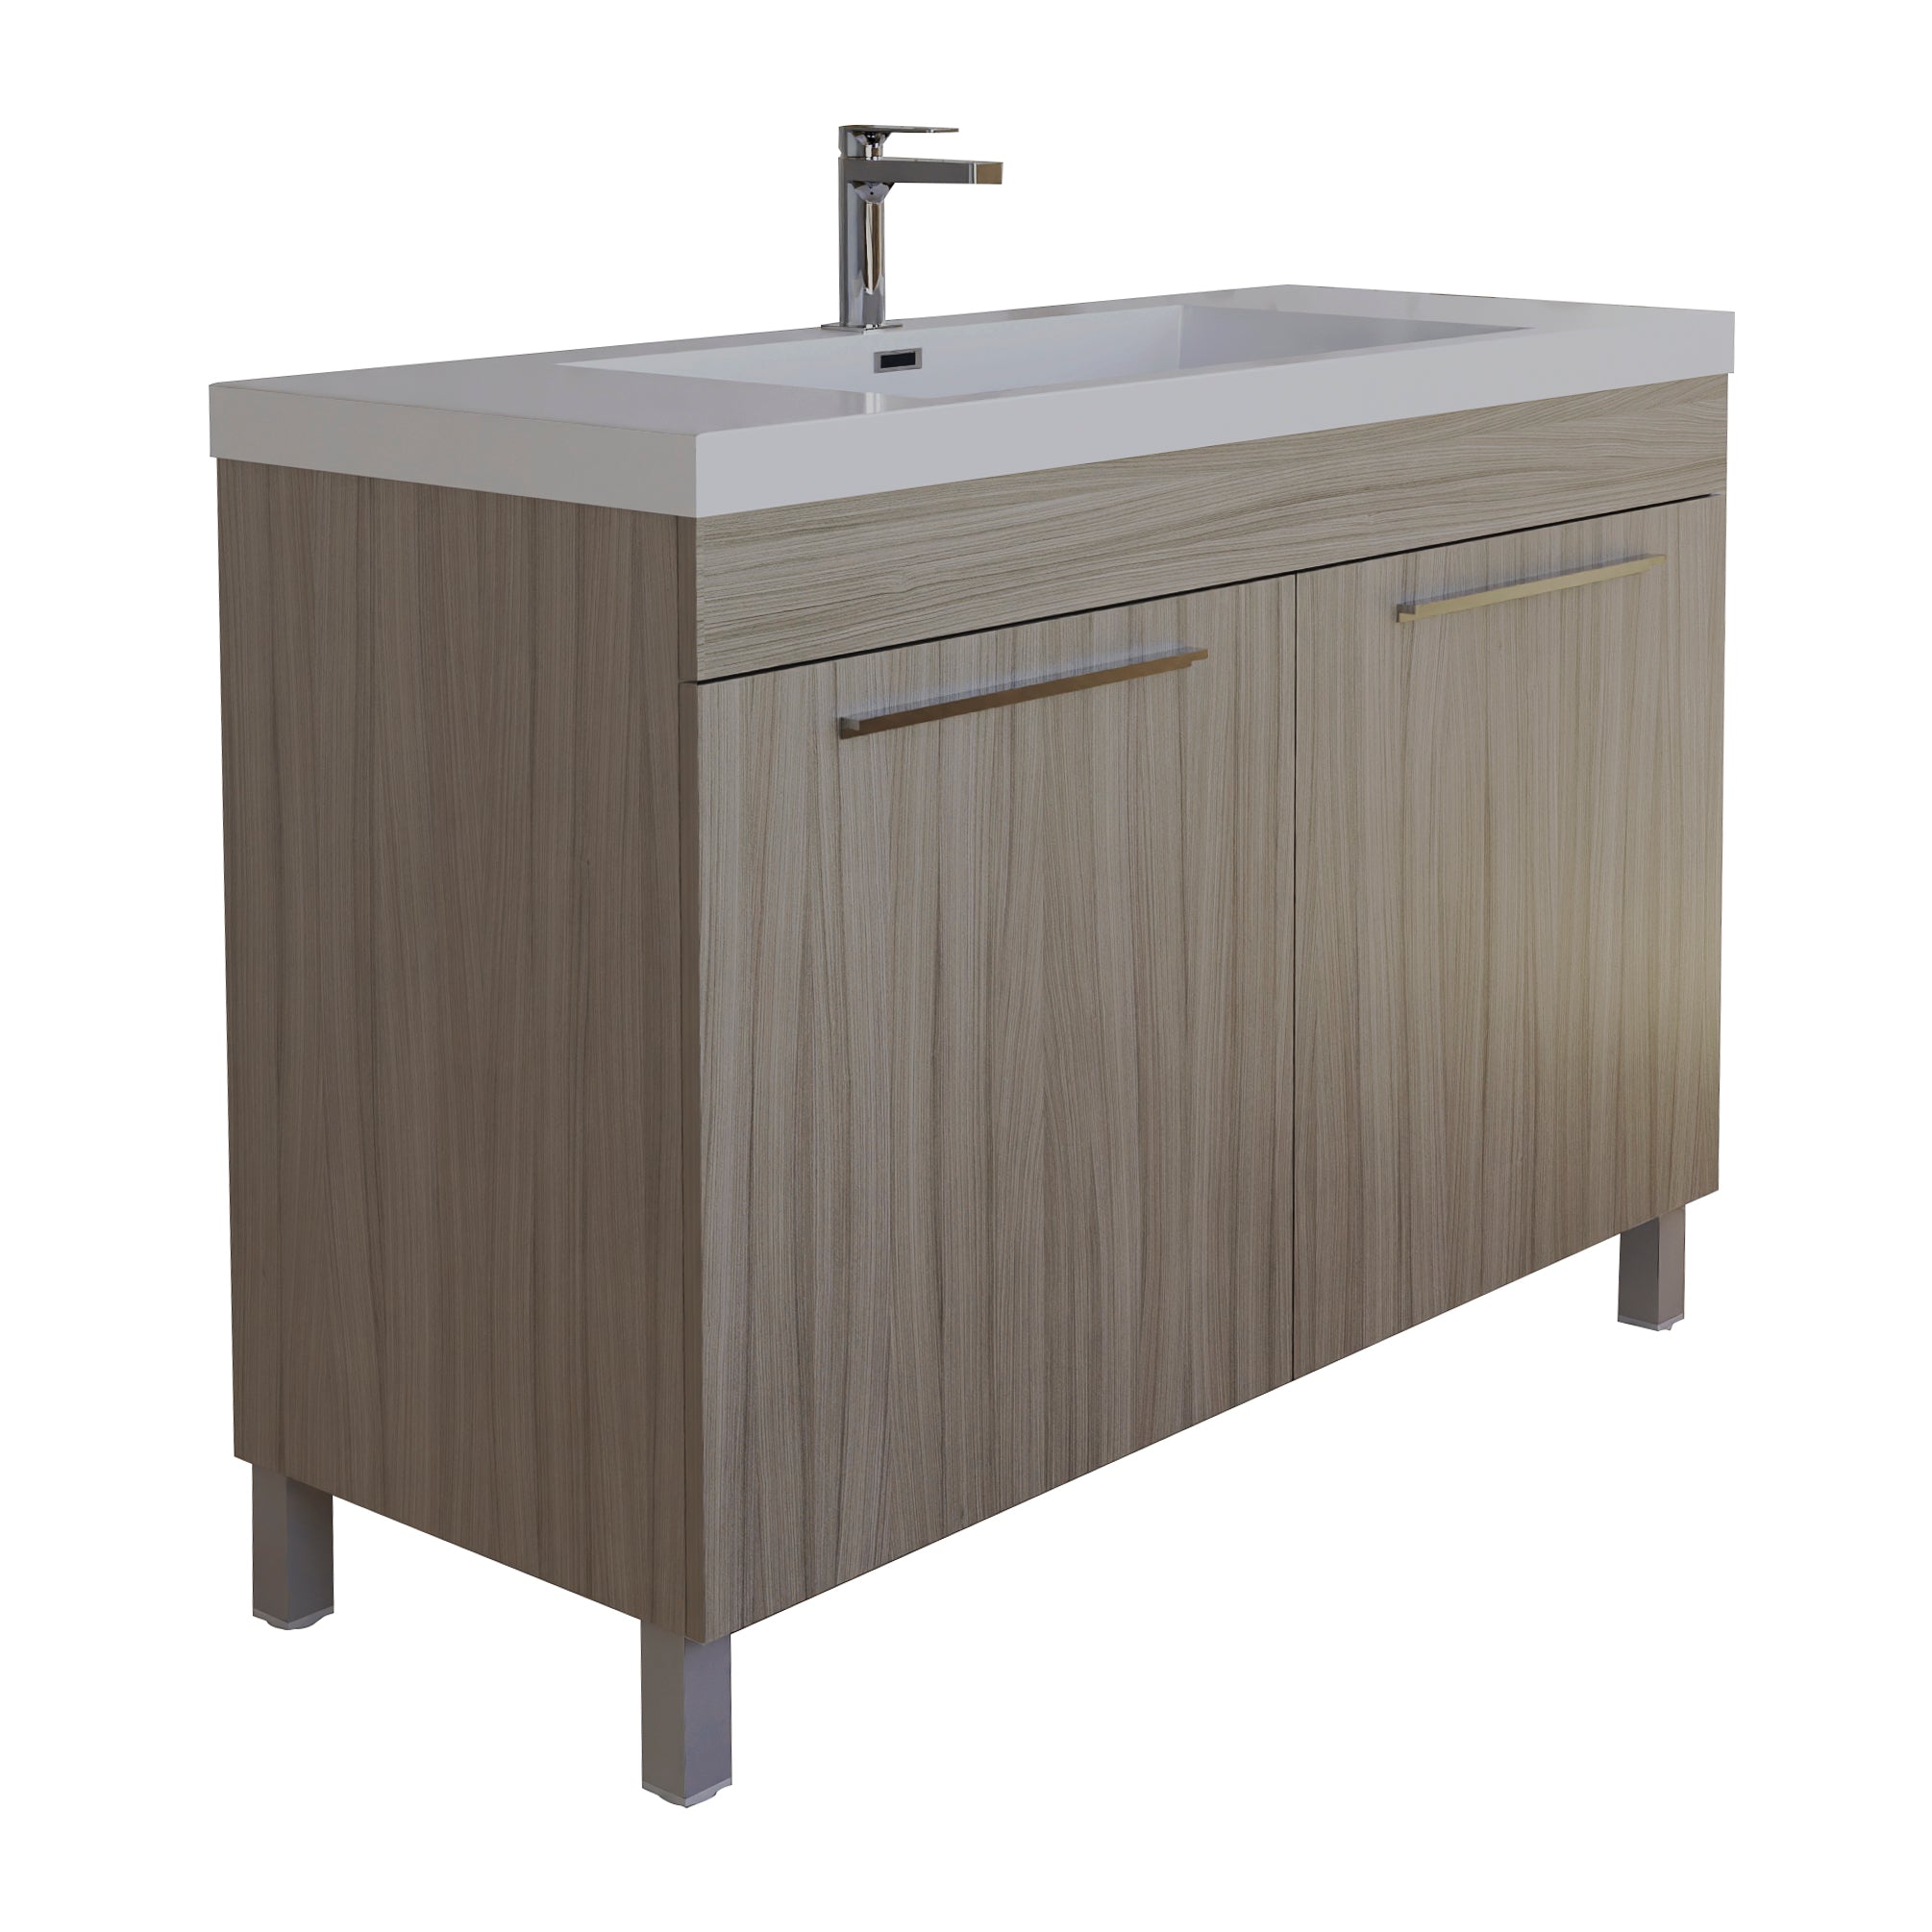 Ocean 39.5 Nilo Grey Wood Texture Cabinet, Square Cultured Marble Sink, Free Standing Vanity Set